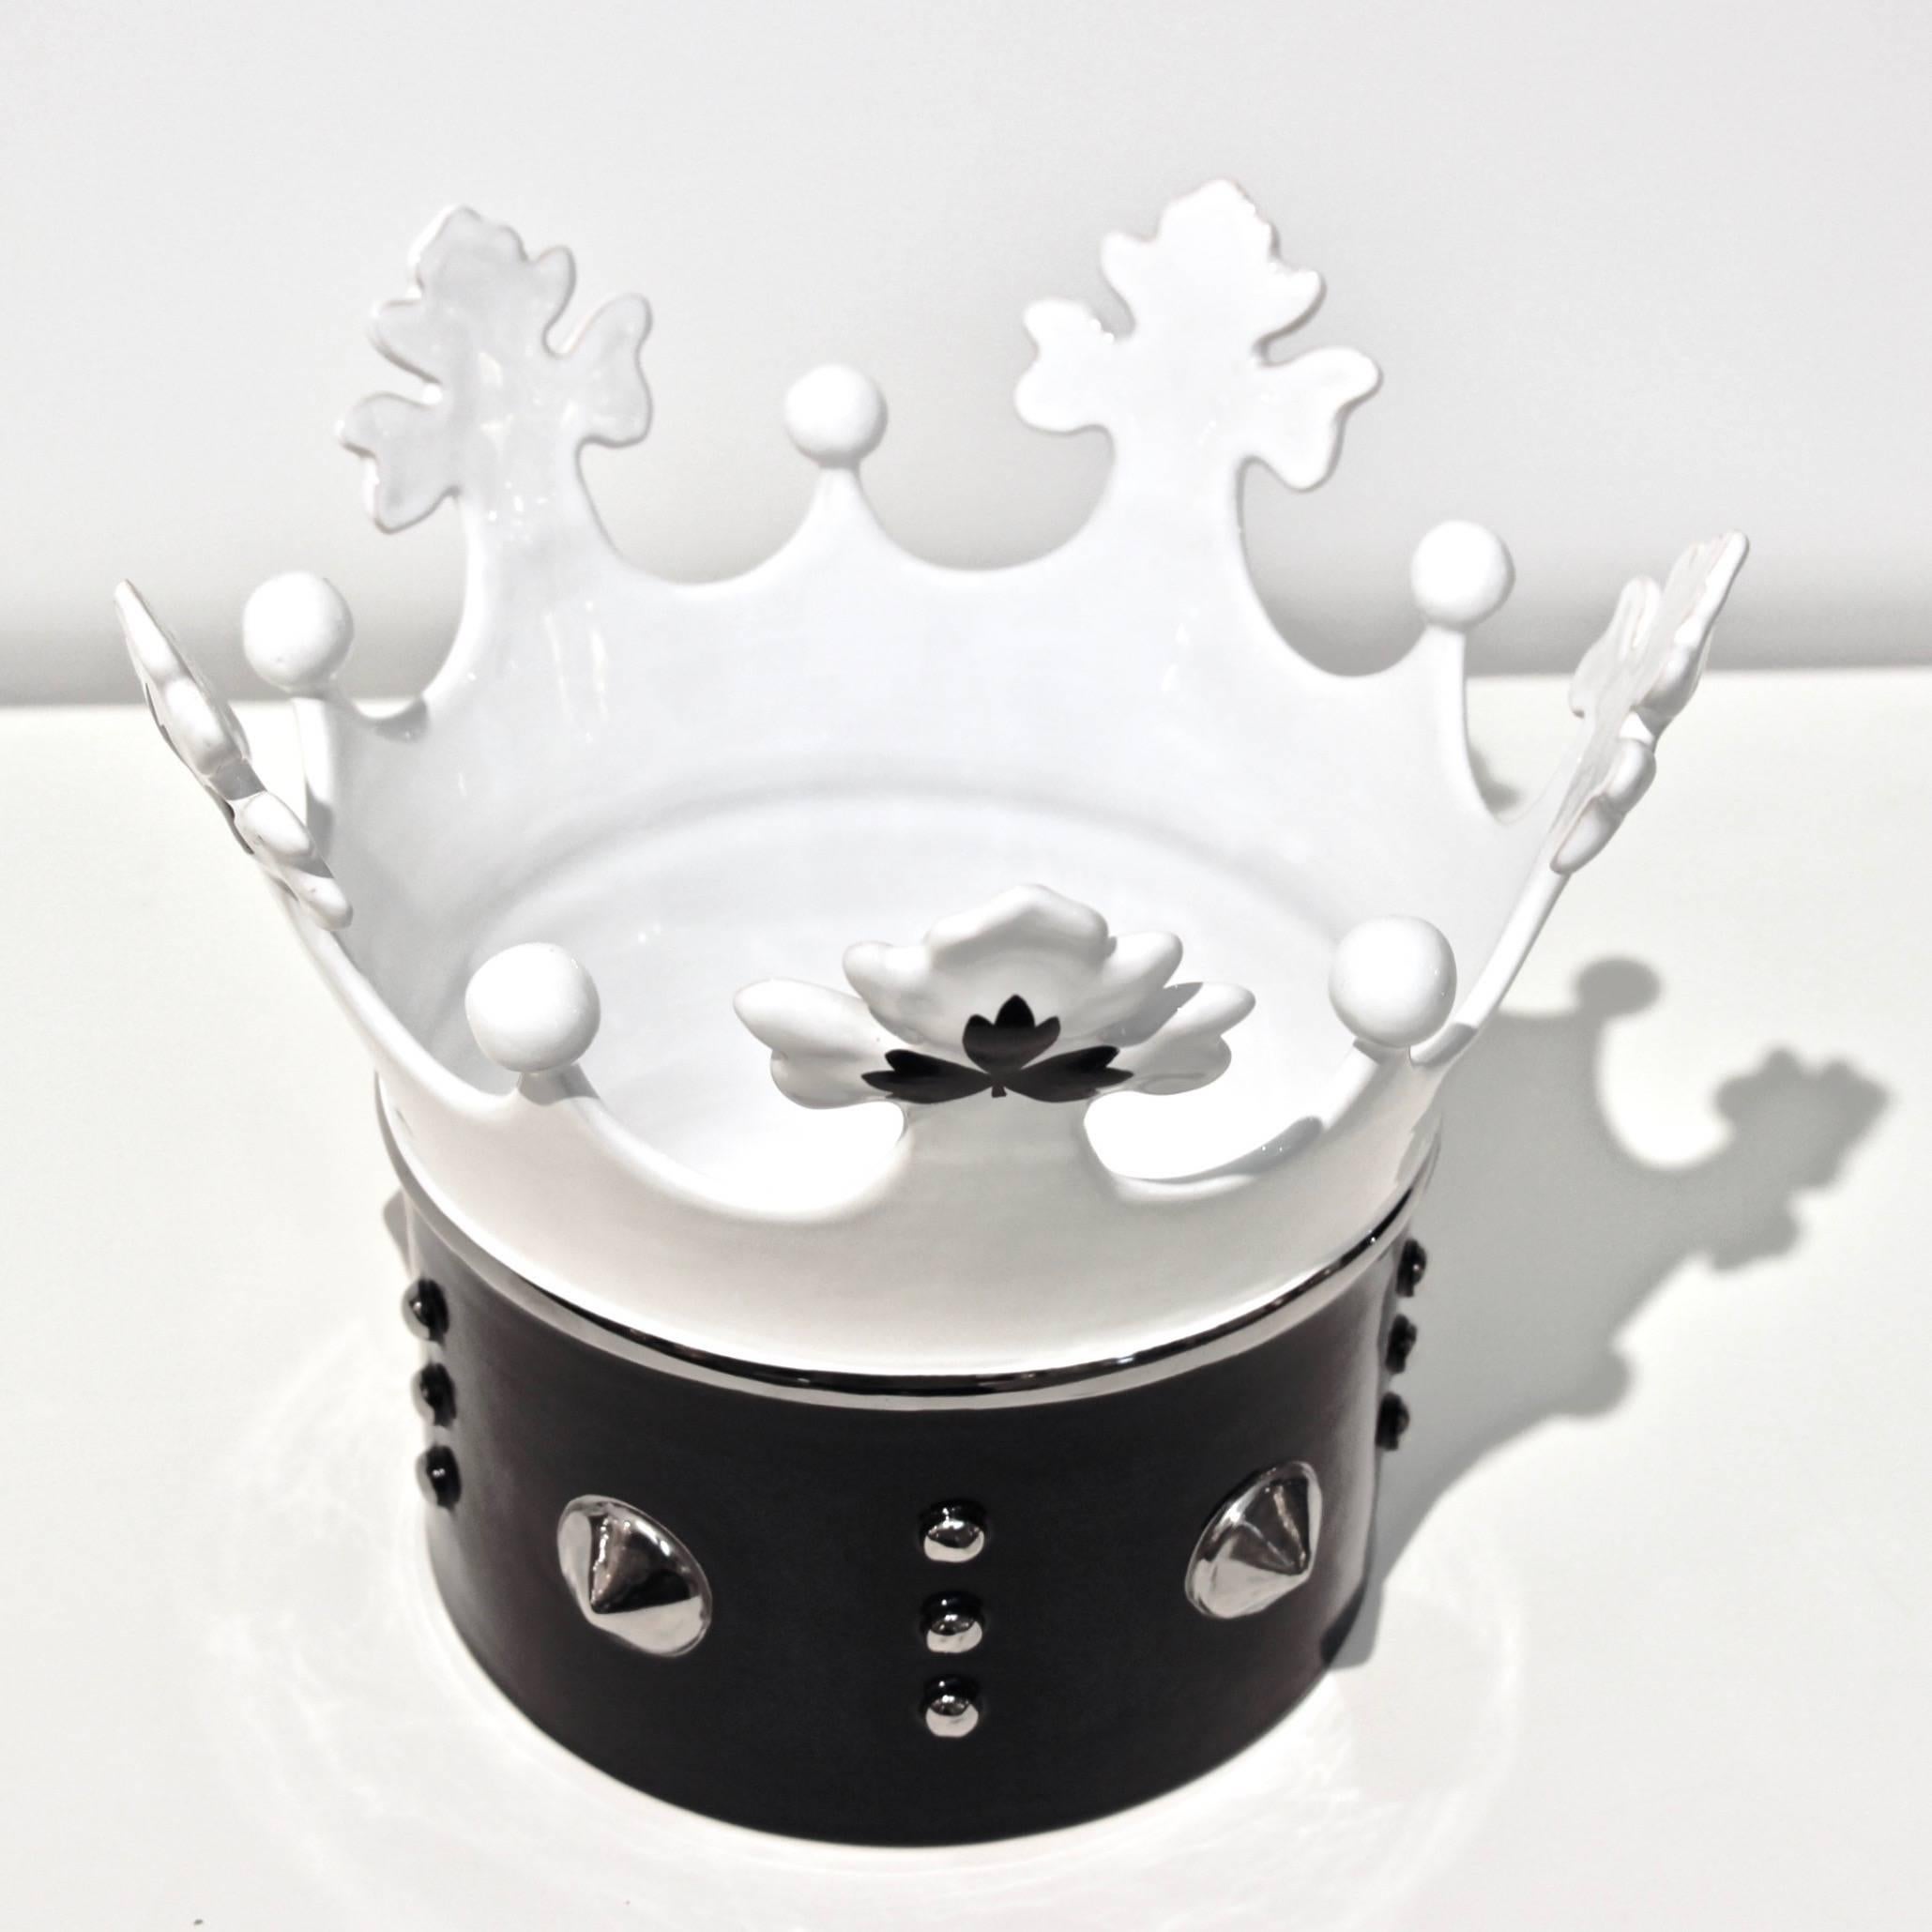 Contemporary handmade Italian work of art, a bowl in the shape of a crown in Majolica by Ceramica Gatti, a long tradition studio and famous designer Ettore Sottsass' favorite. This piece is hand enameled in black and white and hand-painted, with a